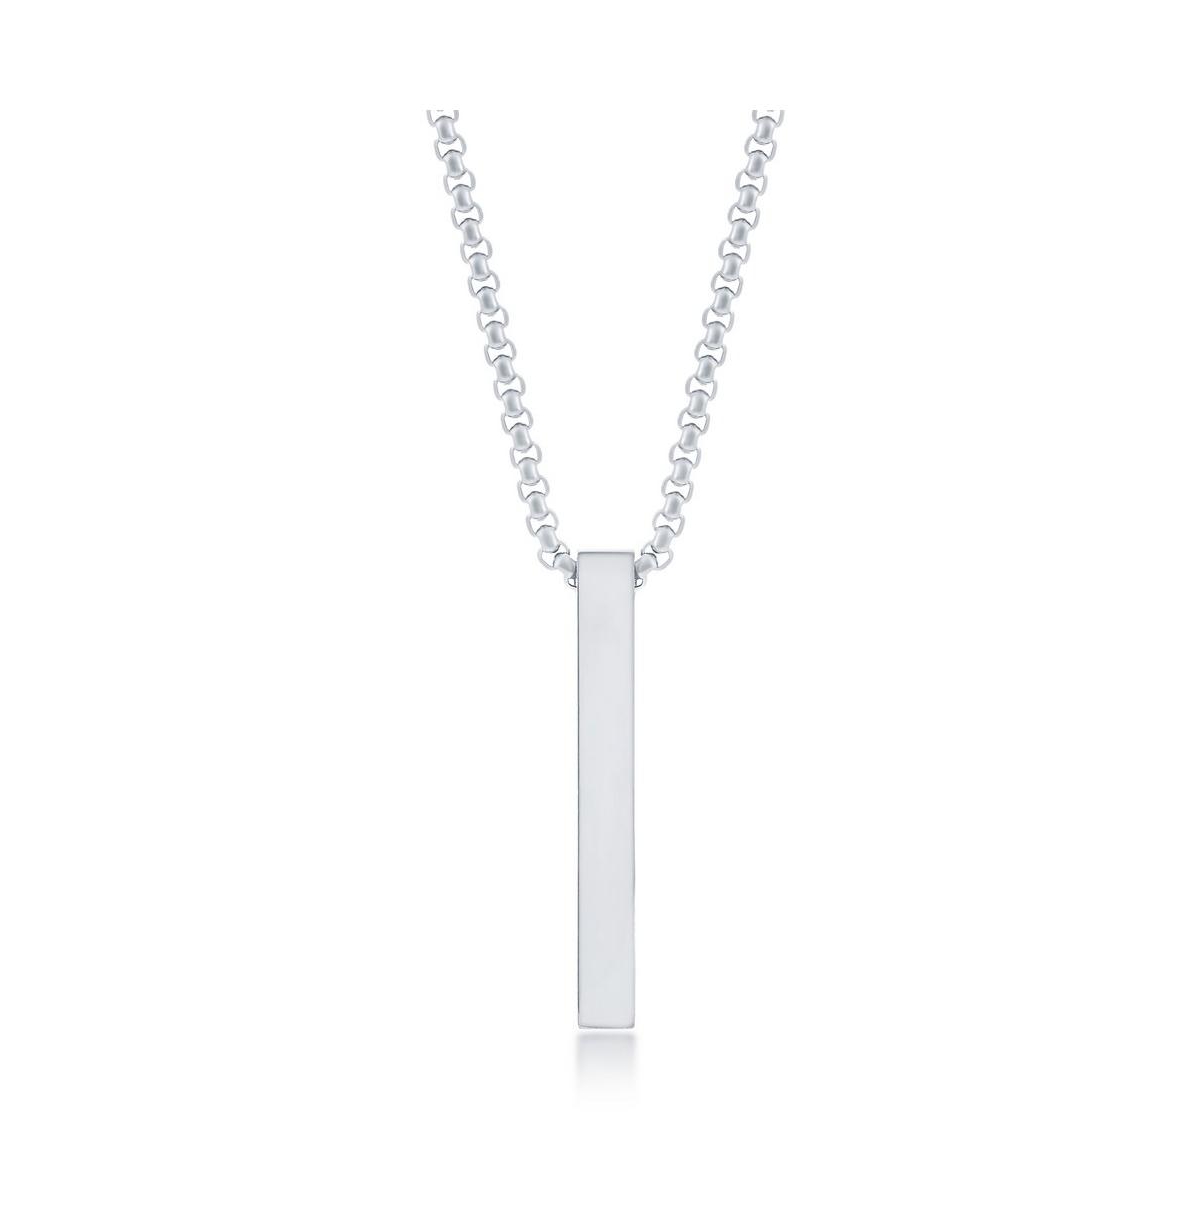 Mens Stainless Steel Vertical Bar Necklace - Silver